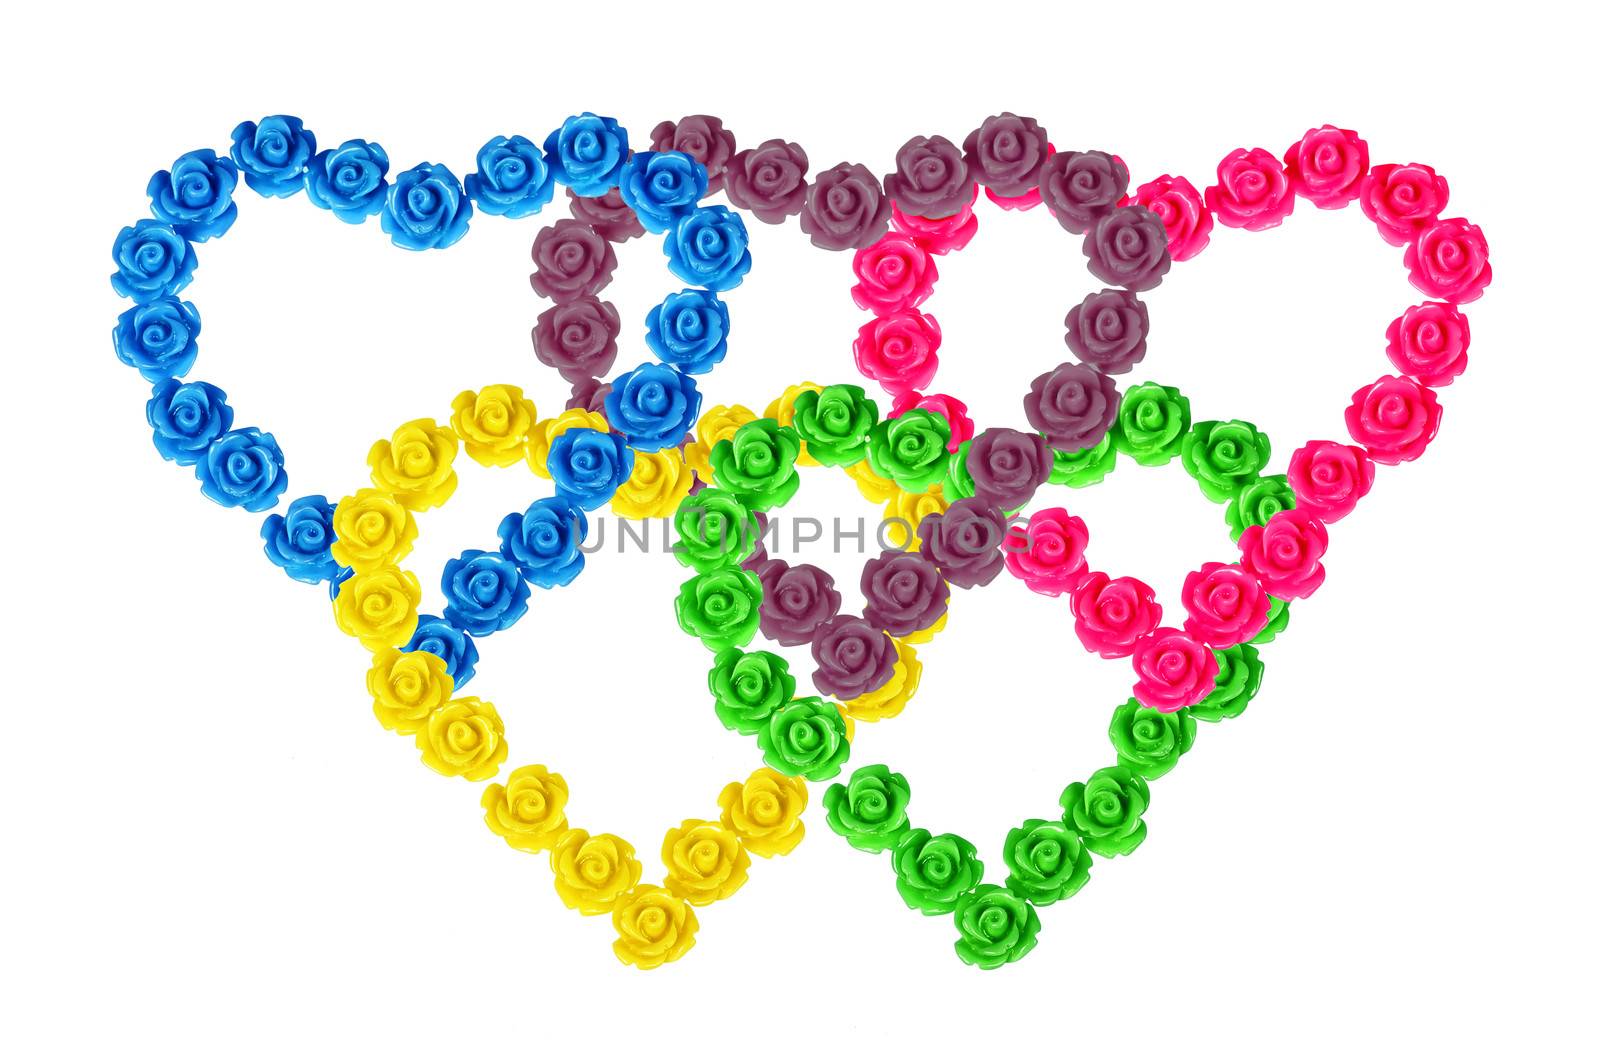 Flowers laid out in the form of hearts. The analogy of the Olympic rings. Isolated on white background. collage